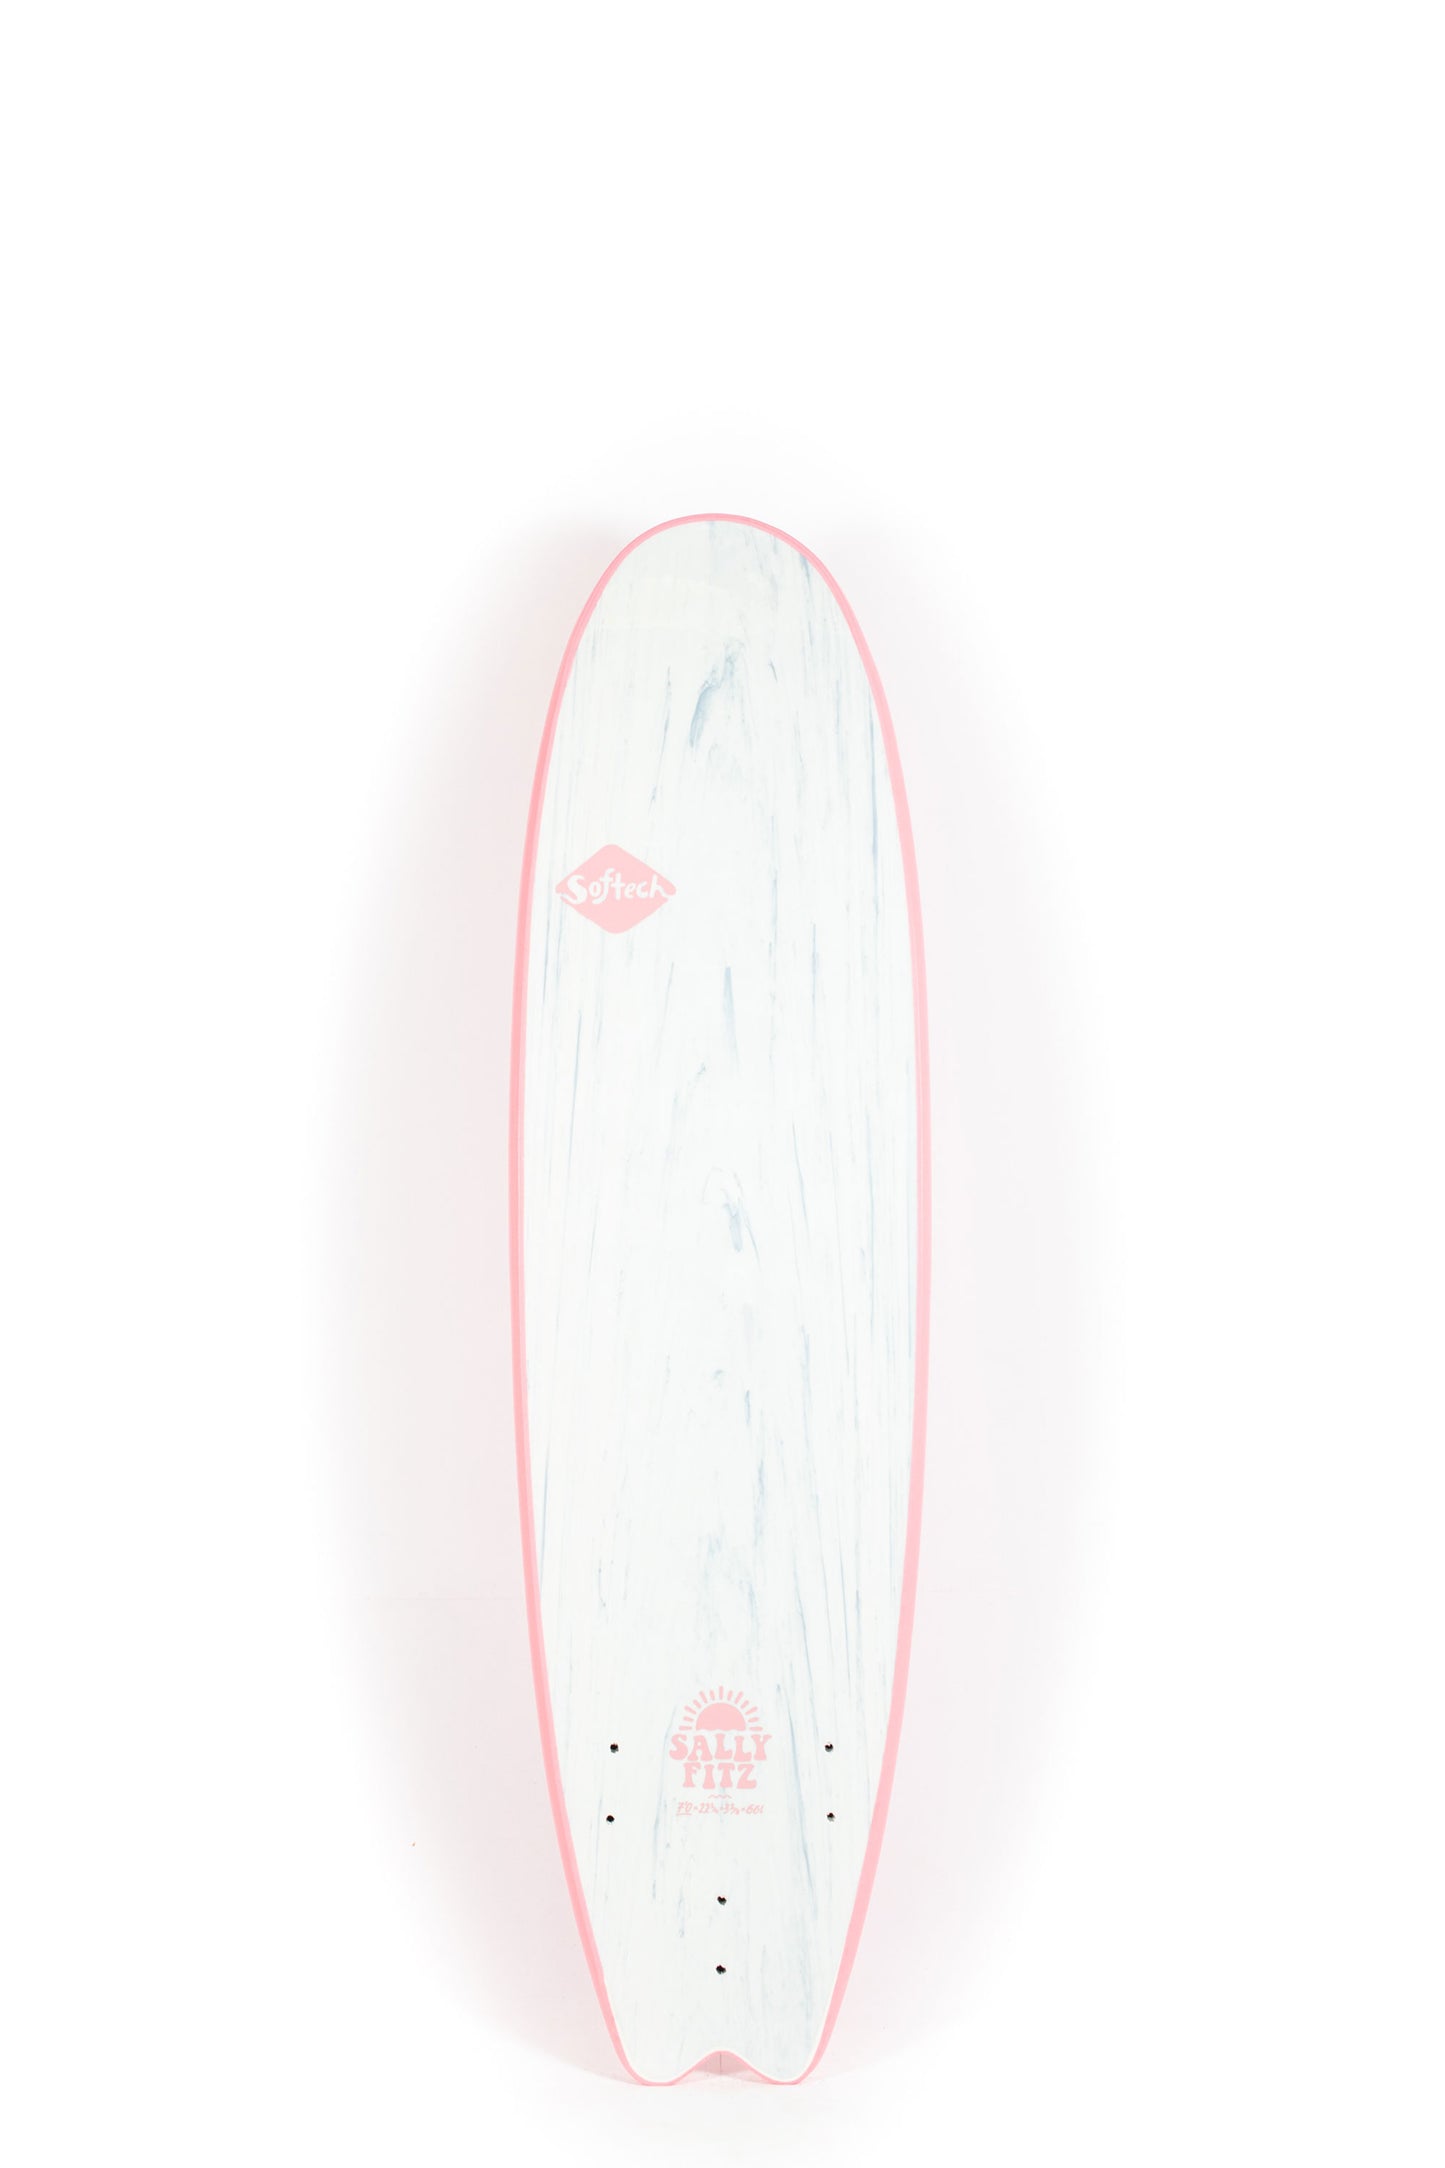 Pukas Surf Shop - SOFTECH - HANDSHAPED SALLY FITZGIBBONS 7''0